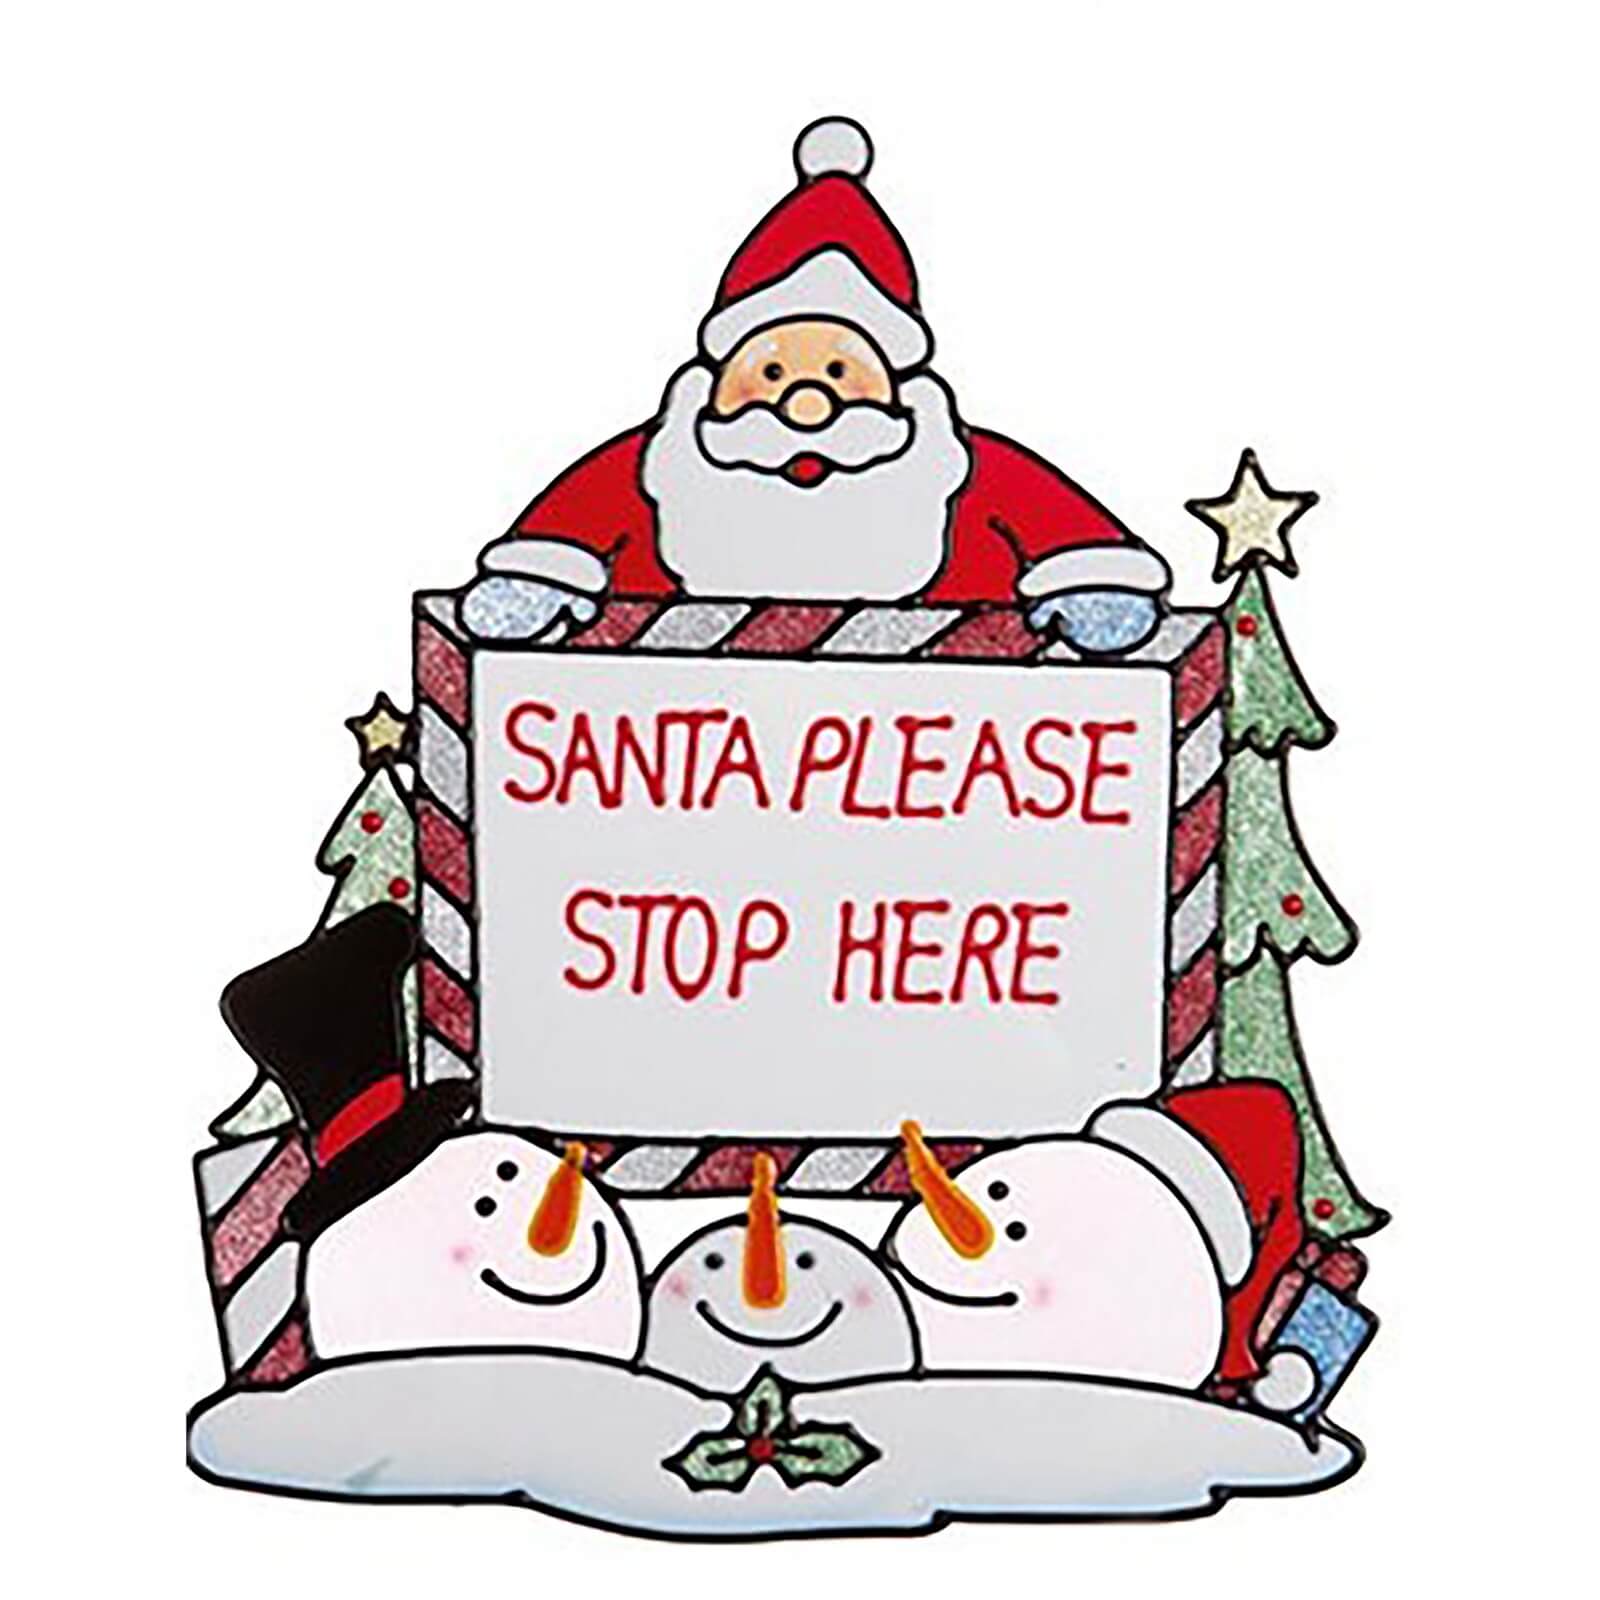 Santa Stop Here Window Cling Decoration